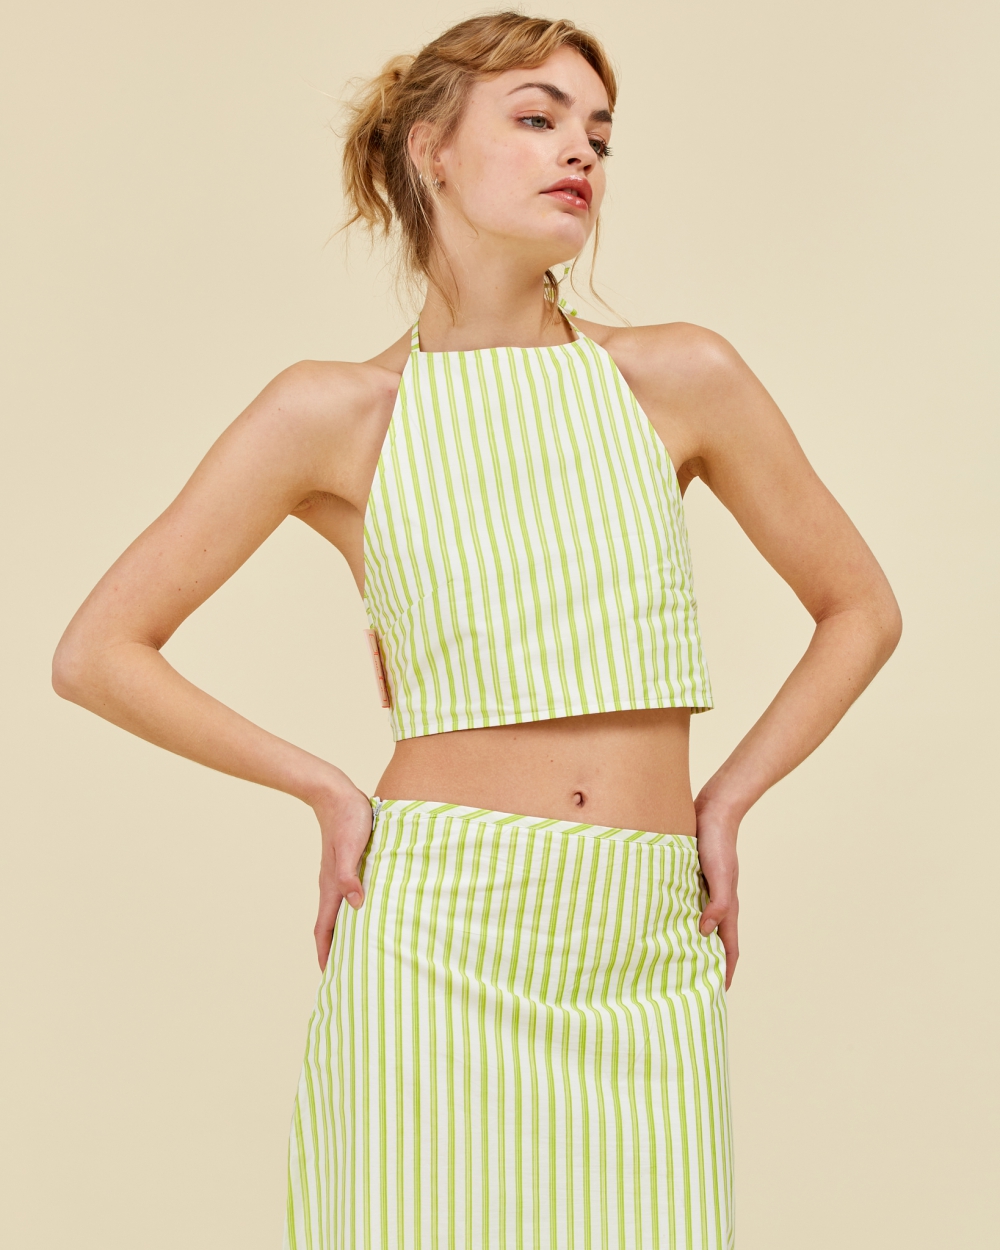 https://www.seamehappy.be/wp-content/uploads/2023/01/Sea-Me-Happy-Zoe-Top-striped-lime-front-zoom-.jpg